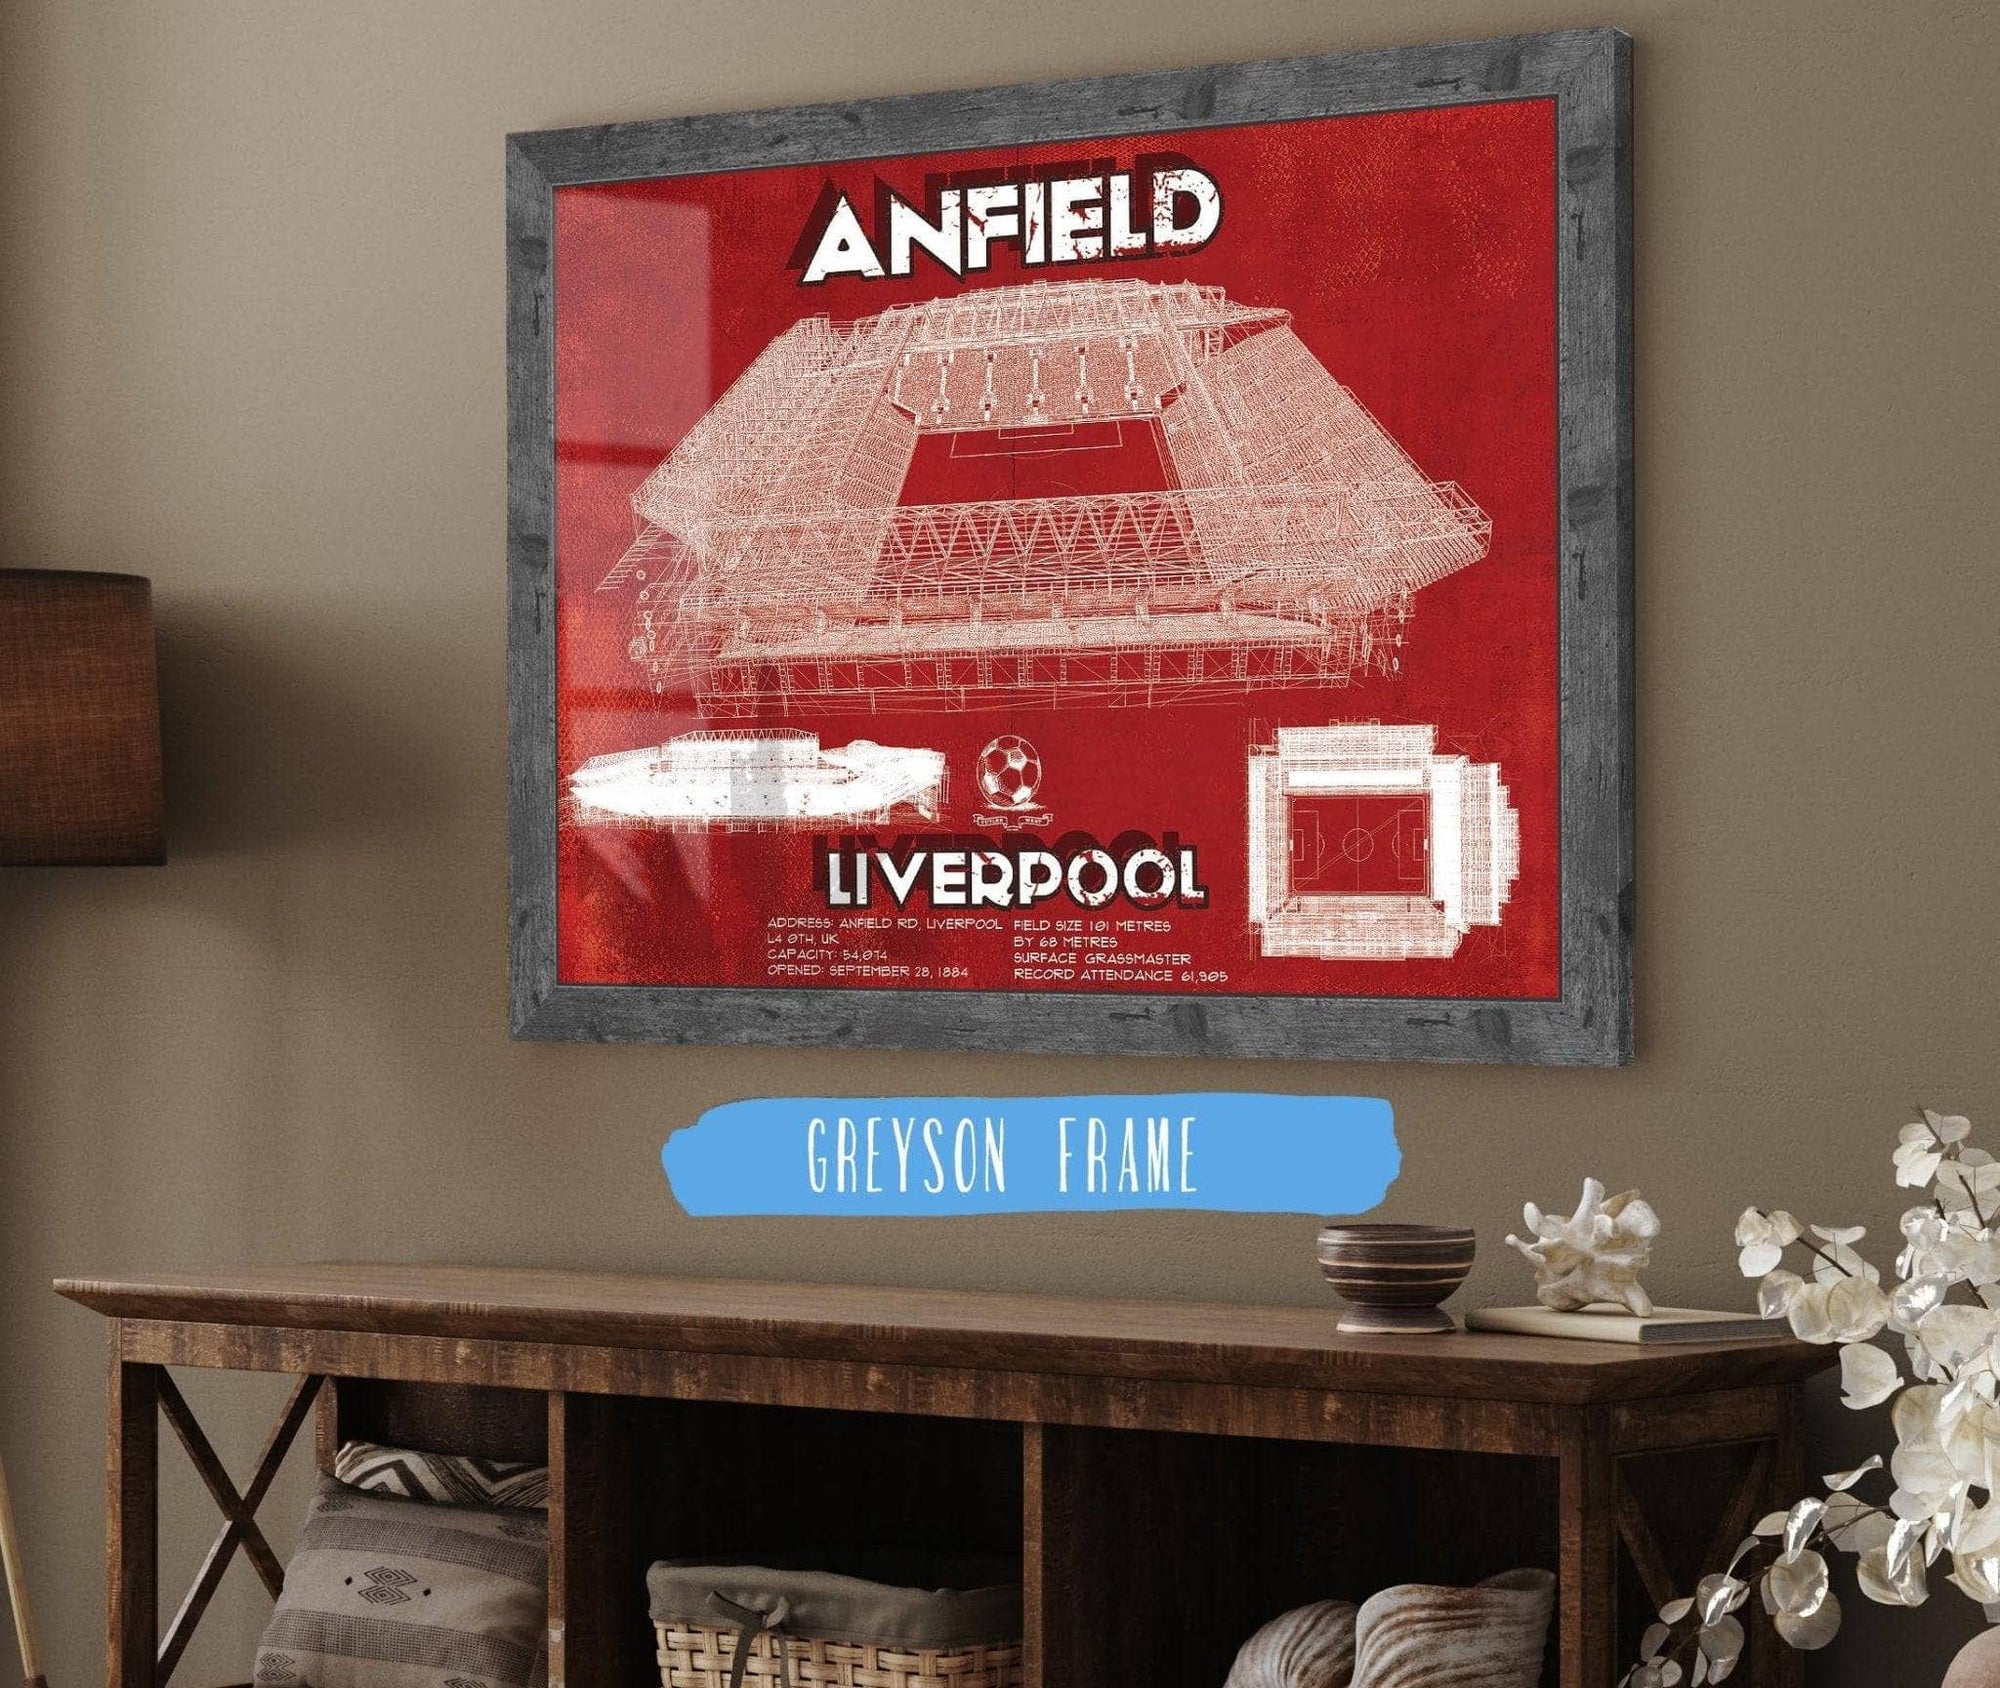 Cutler West Soccer Collection Liverpool F.C - Anfield European Football / Soccer Print